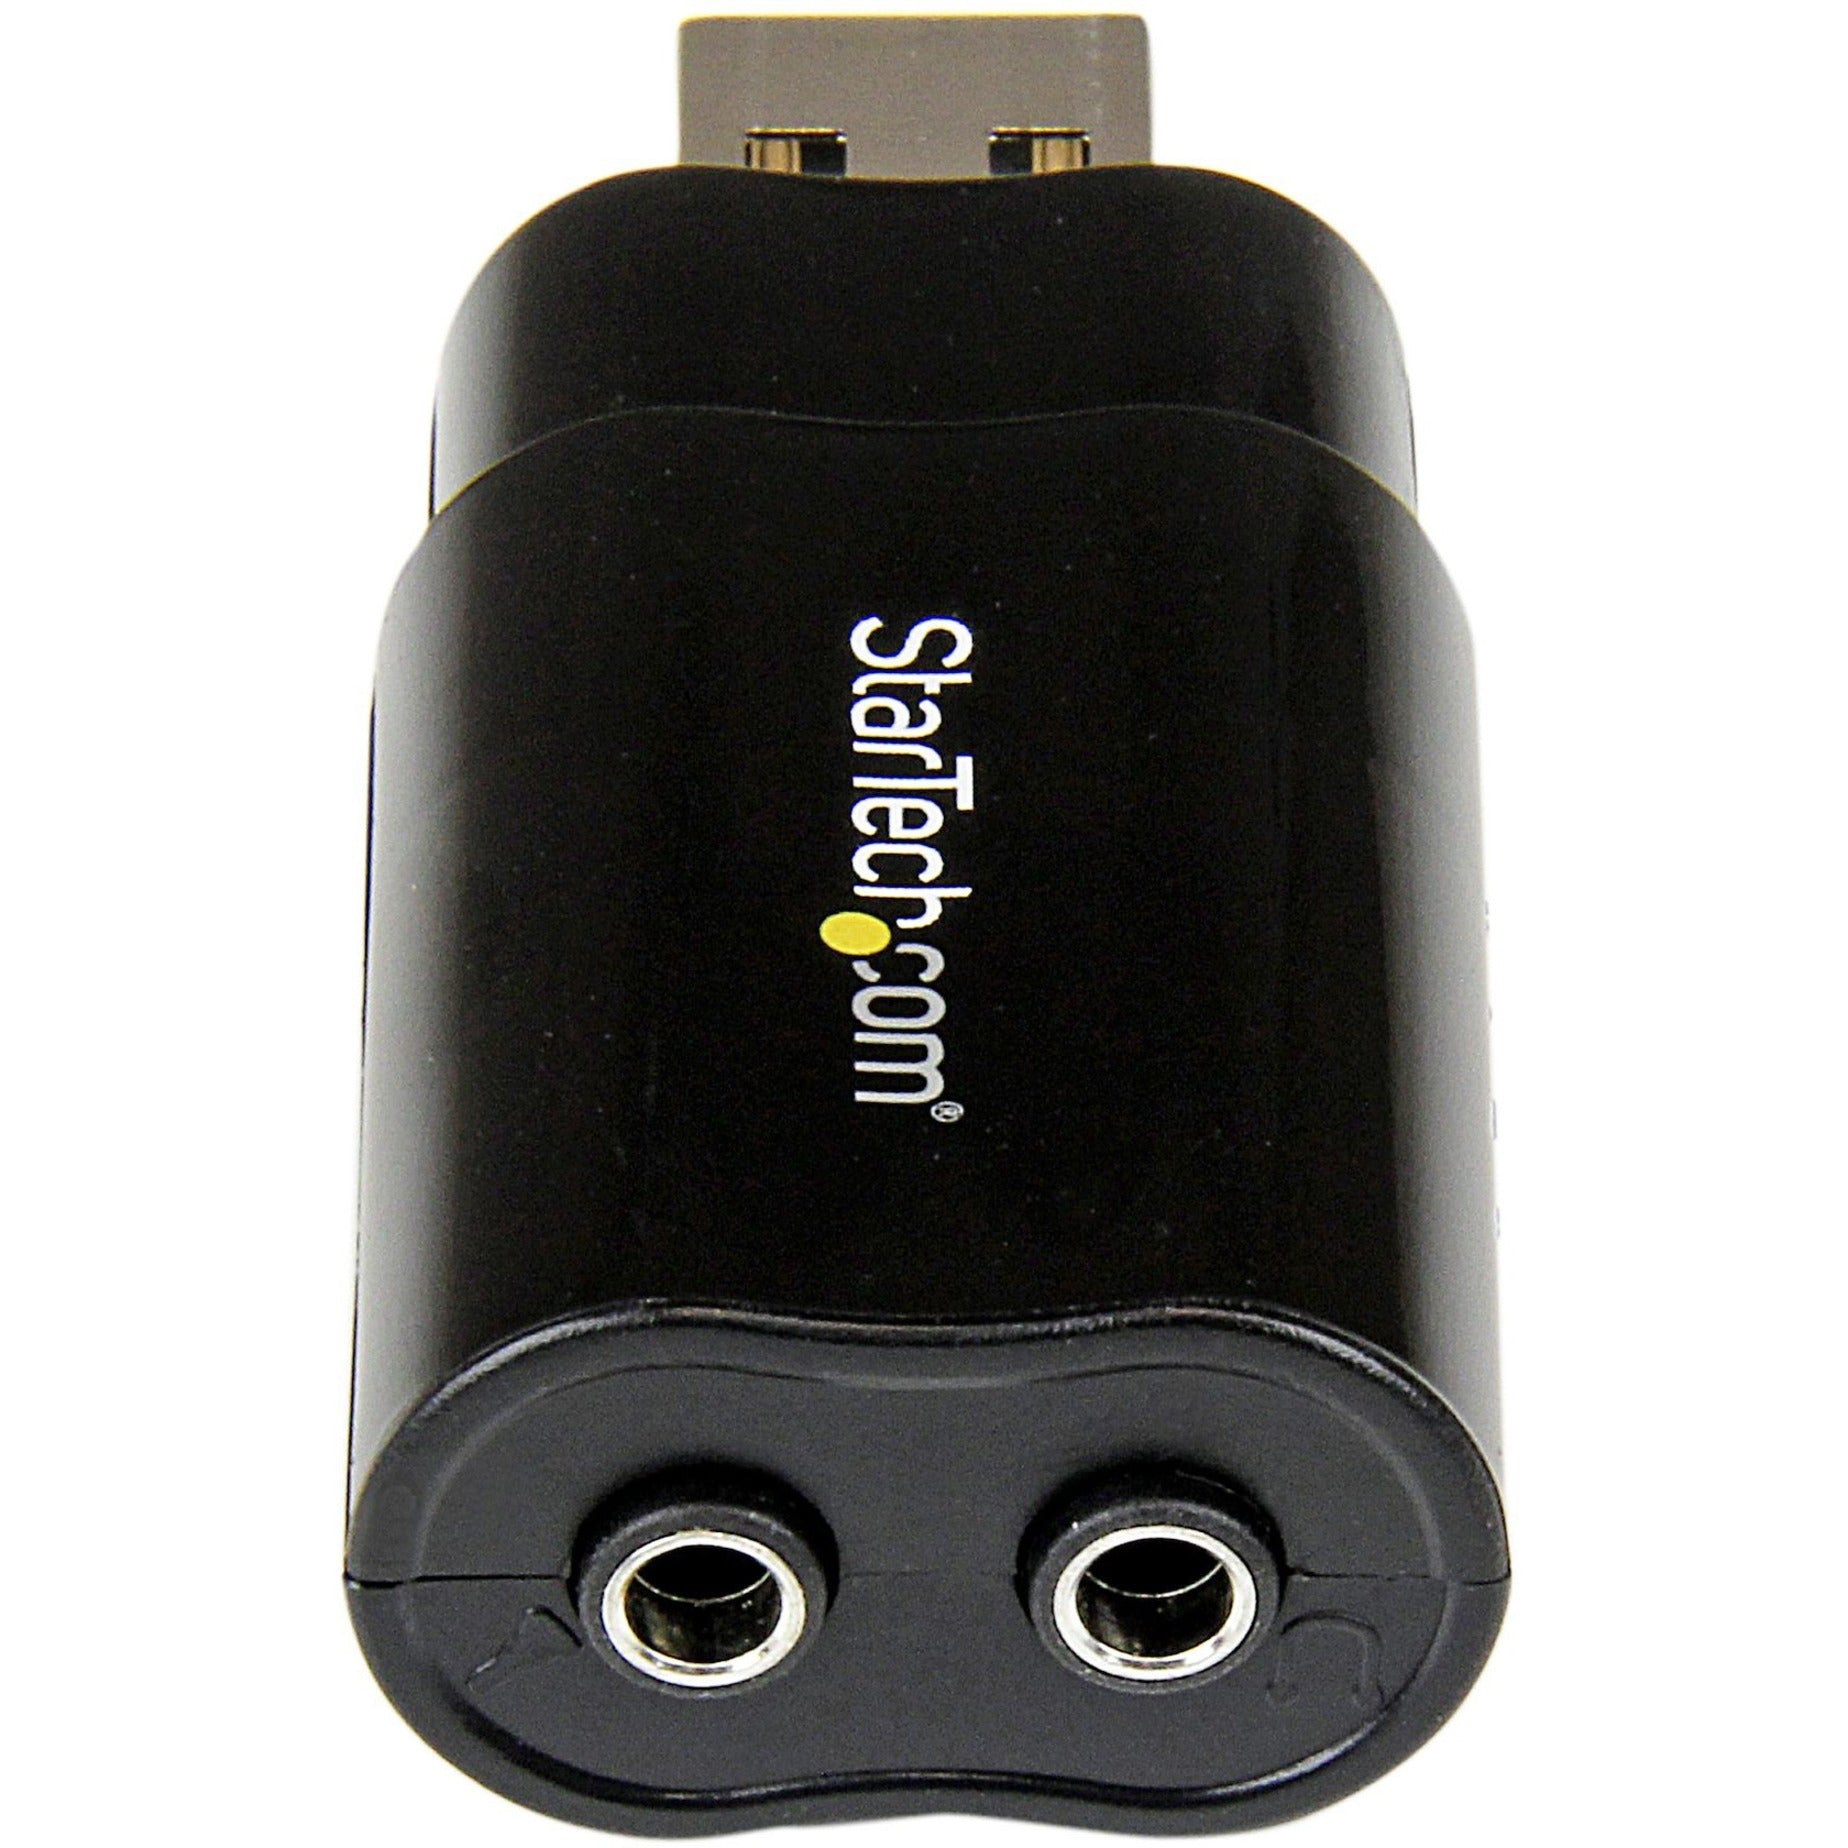 StarTech.com ICUSBAUDIOB USB 2.0 to External Stereo Audio Adapter, Plug and Play, TAA Compliant